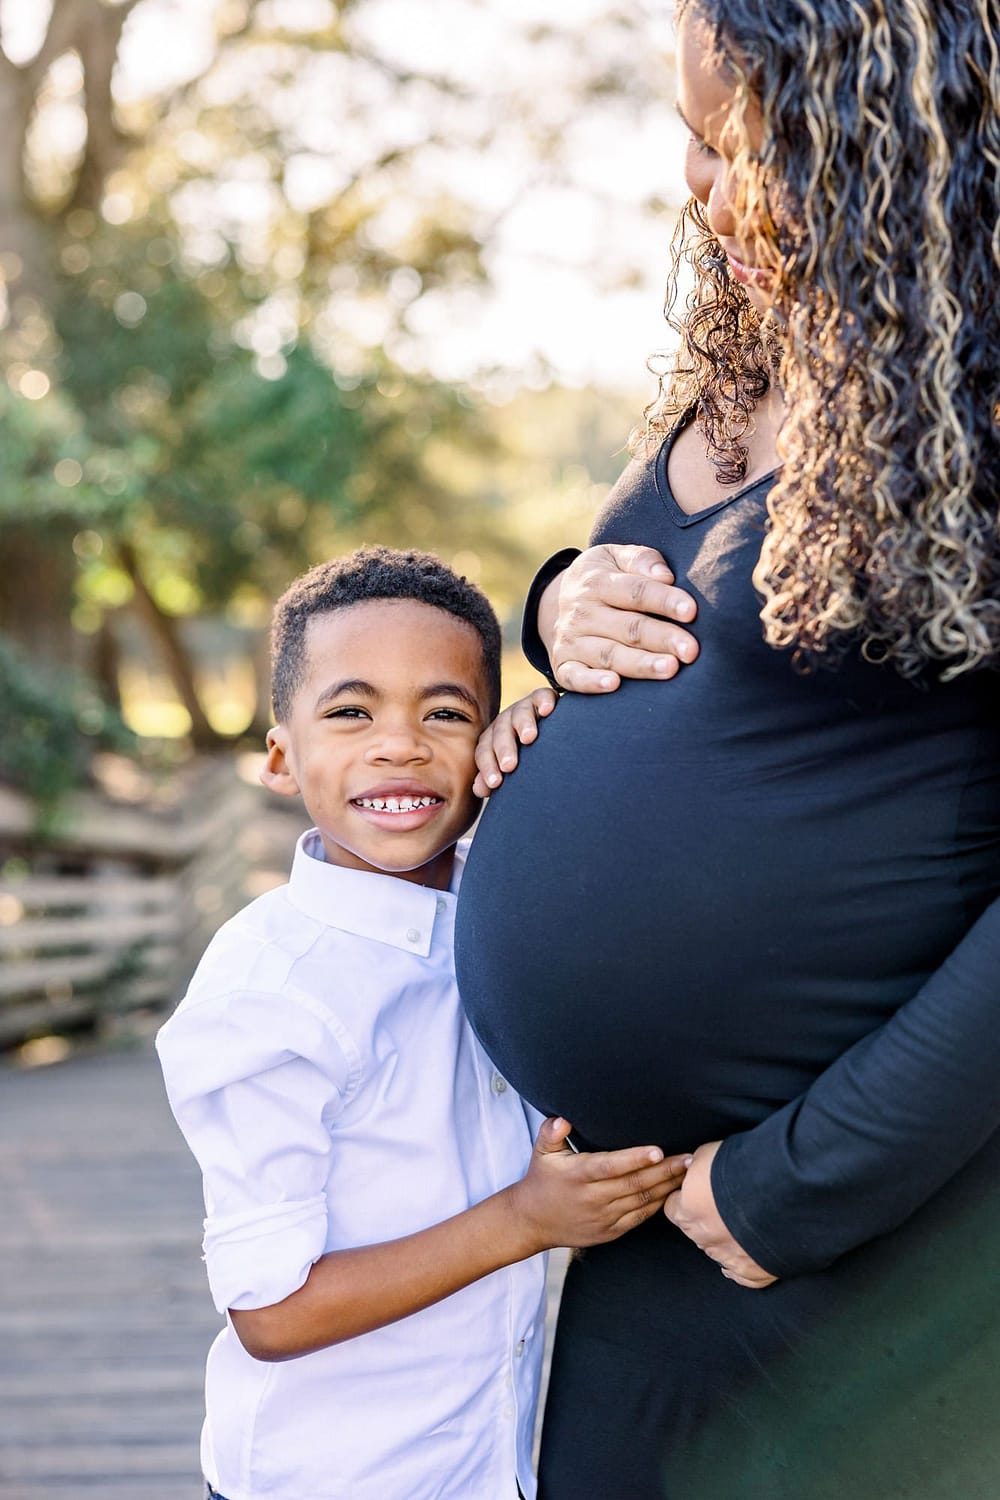 Maternity photos with children